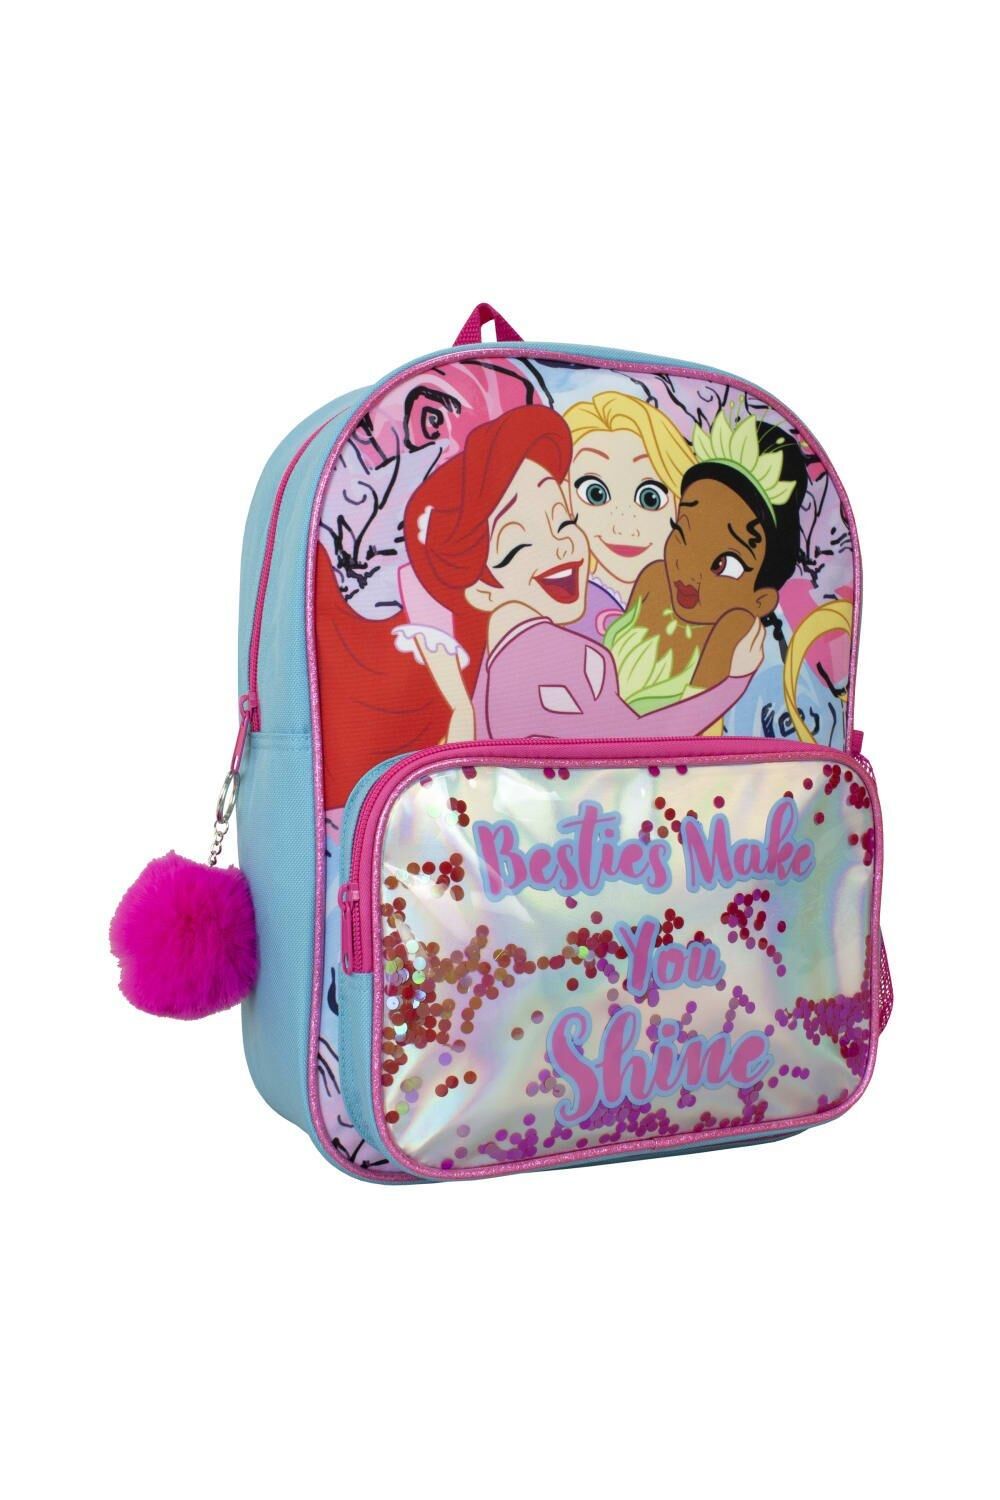 Disney Princess Backpack With Pompom Featuring Ariel Rapunzel And Tiana